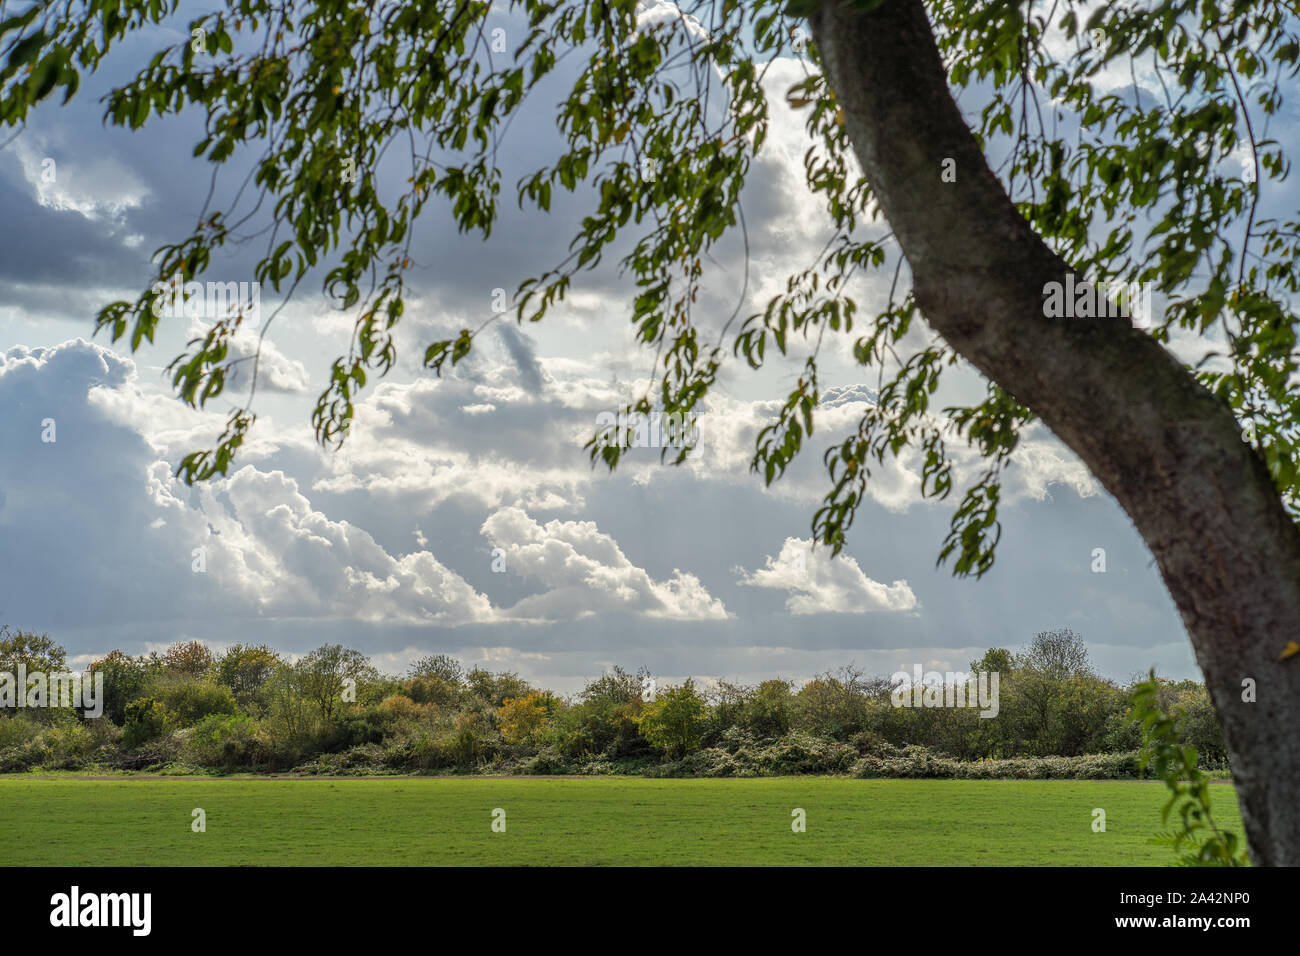 Dramatic clouds over a pasture, seen through the thin foliage of a tree. Stock Photo